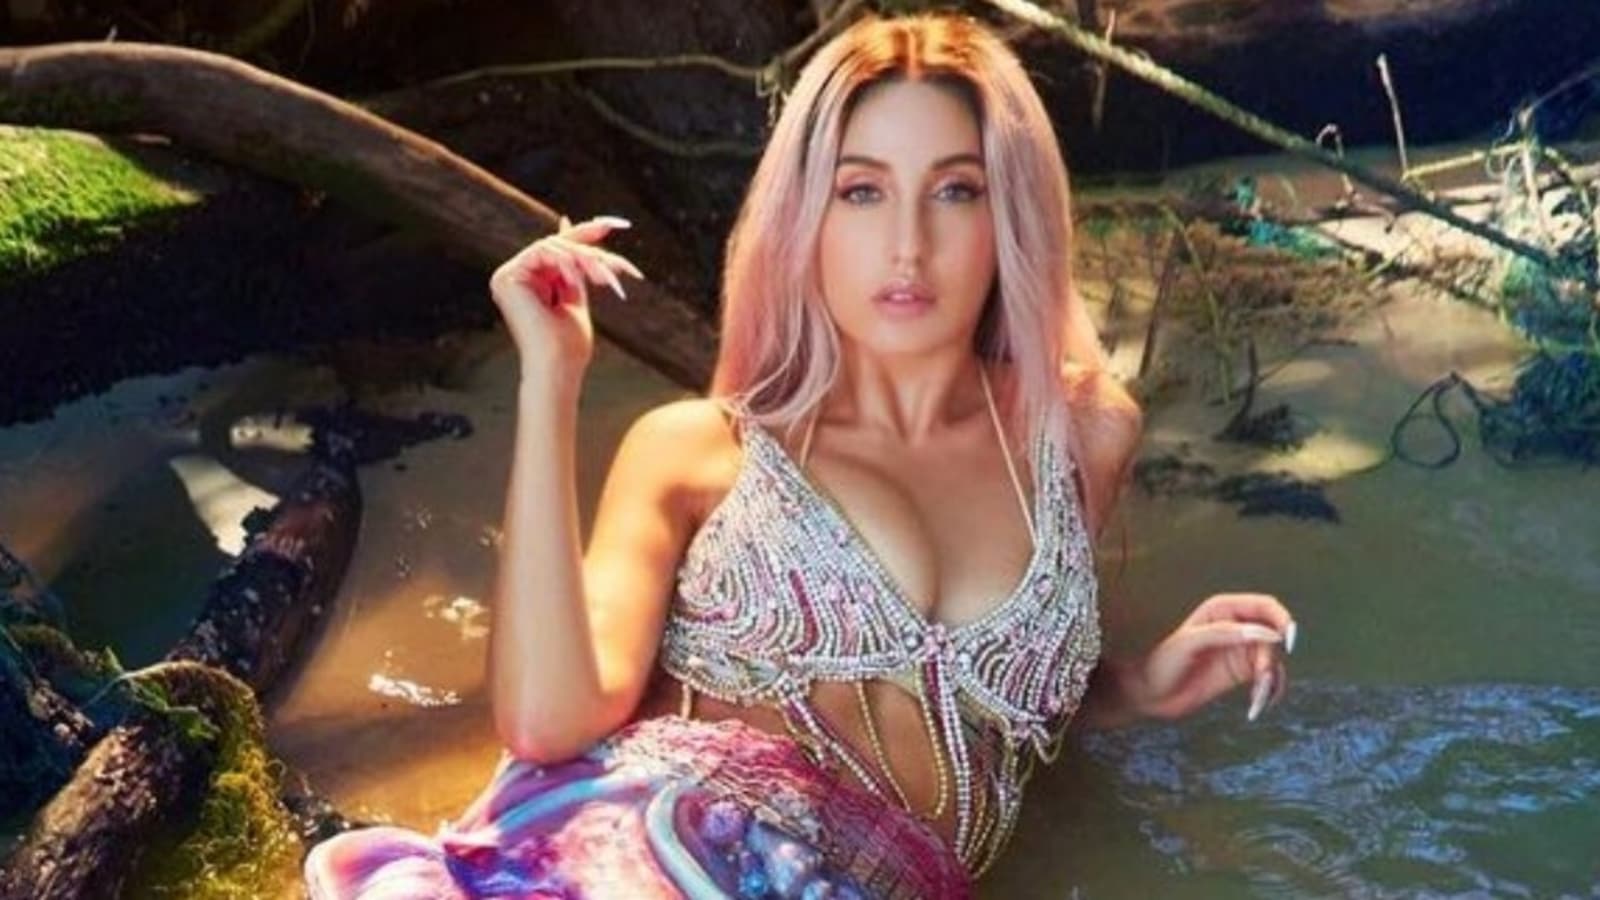 Nargis Fakhri Bikini Hot Sex - Nora Fatehi is a mermaid with blonde pink hair for sexy photoshoot, don't  miss Nargis Fakhri's comment | Fashion Trends - Hindustan Times